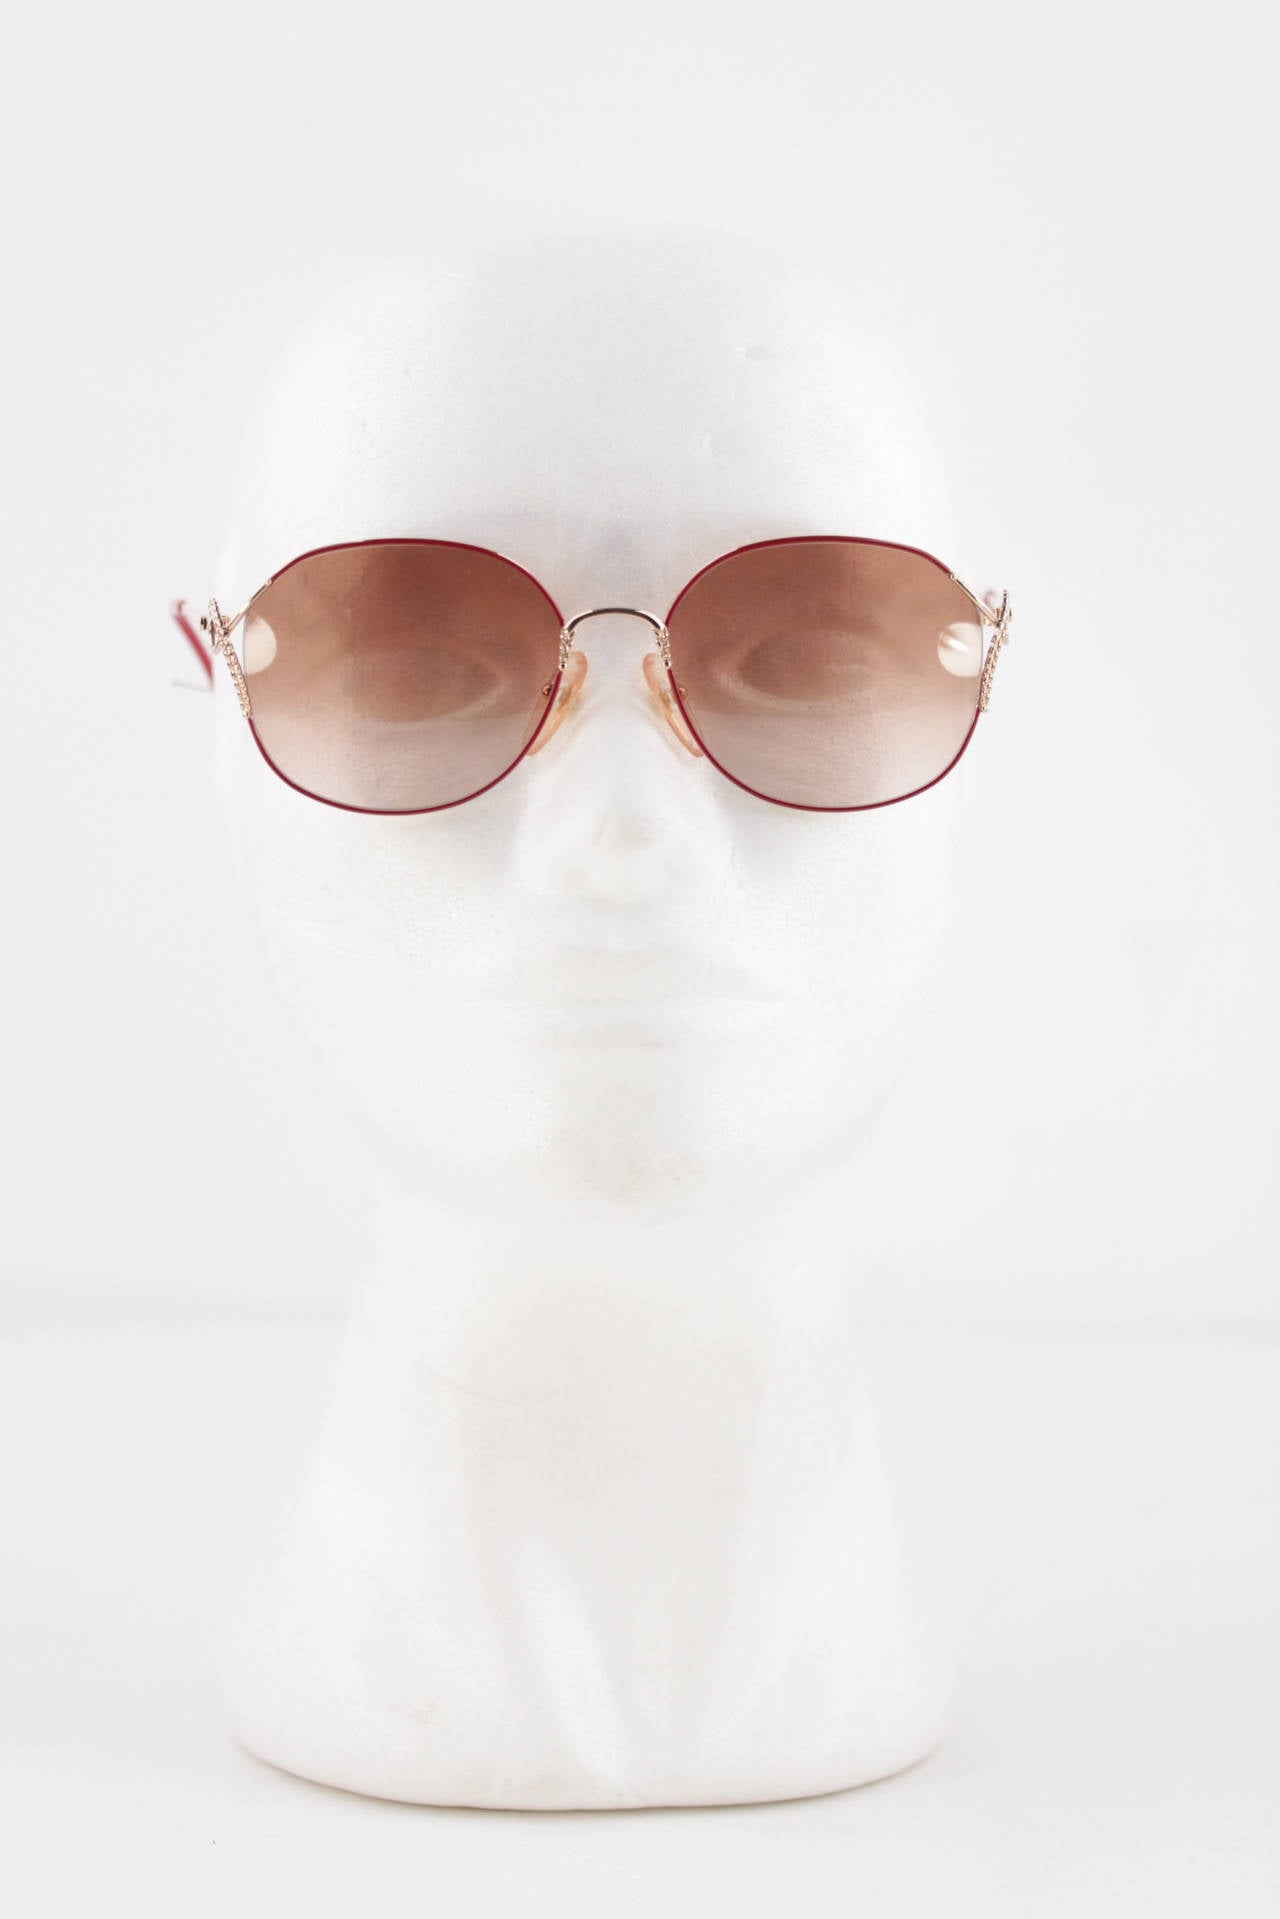 Brand: CHRISTIAN DIOR - OPTYL frame, Made in Austria

Style Name & Number: 2901 - 43 - 56/17 - 130

Frame color / effect: Gold metal Frame with purple accents (CD logos on the temples)

Lens color / effect: Gradient/Faded light Brown